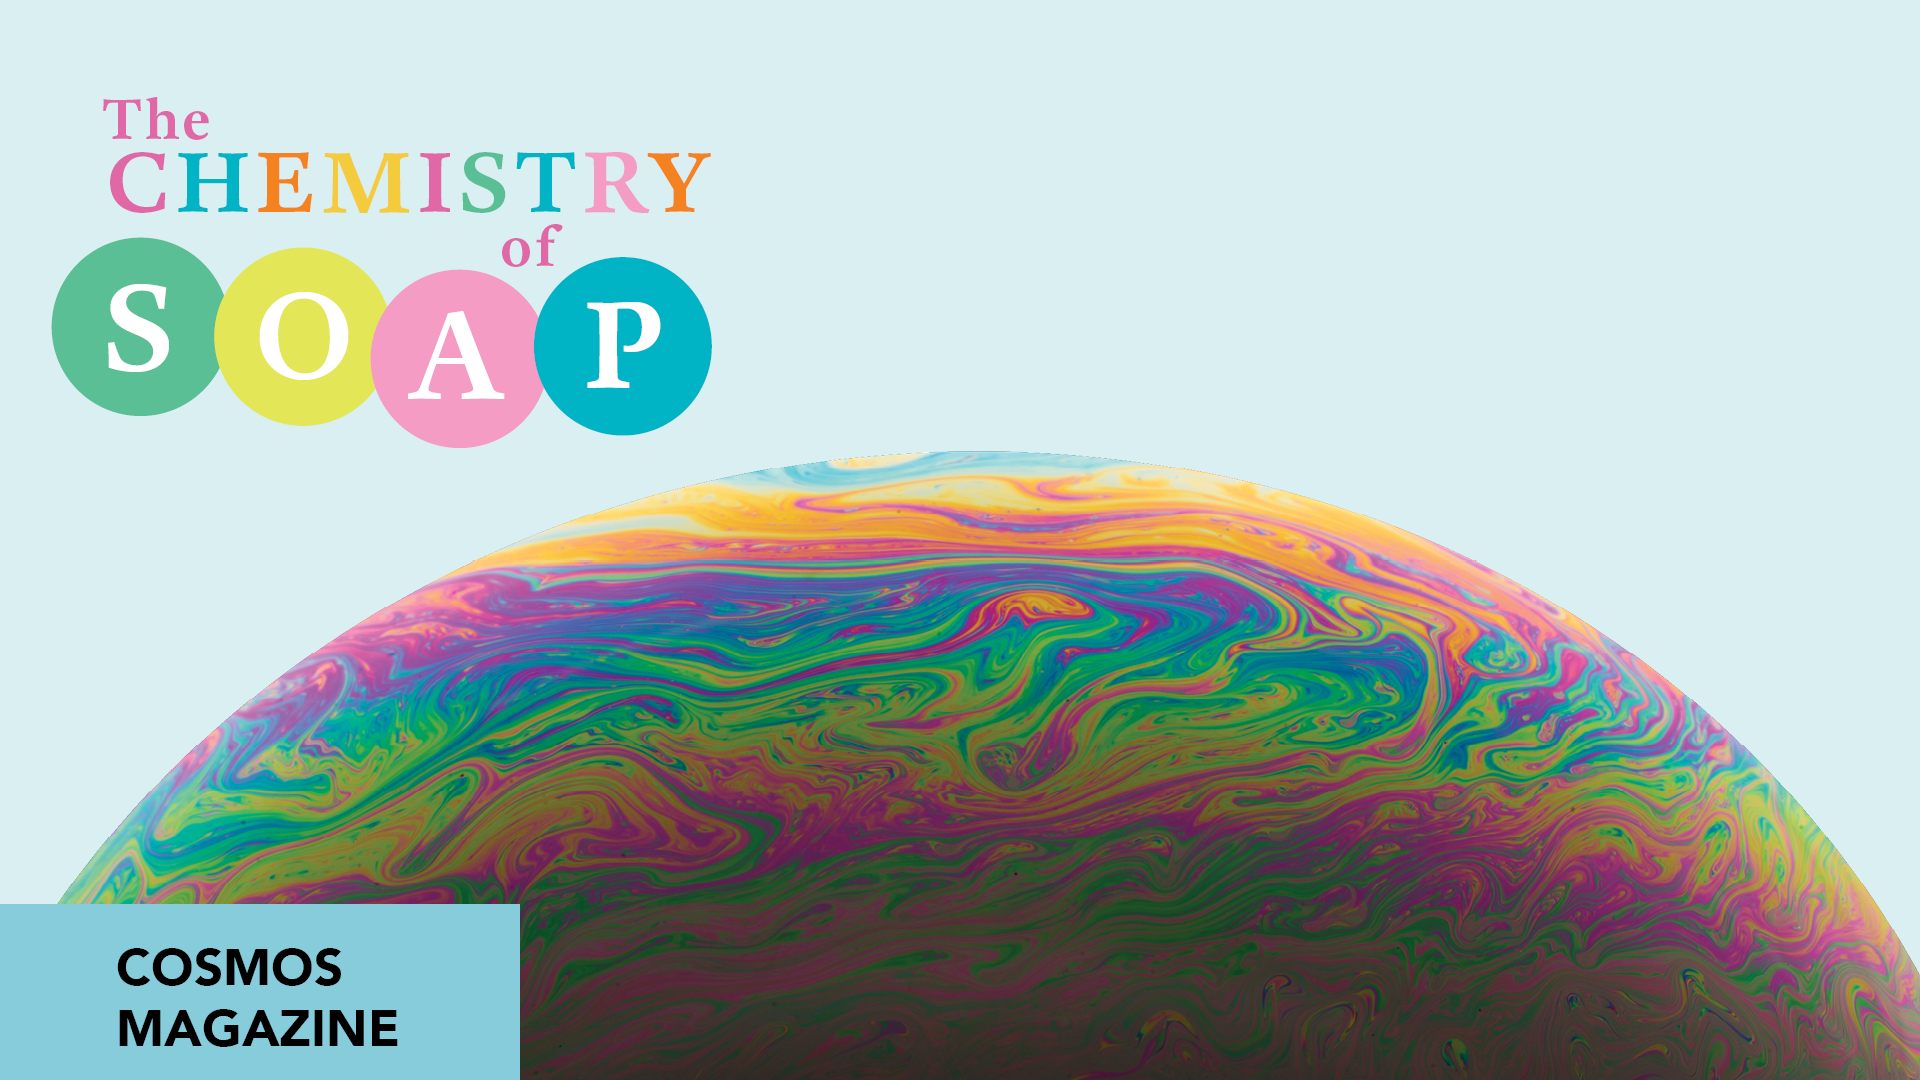 COSMOS Magazine: The Chemistry of Soap